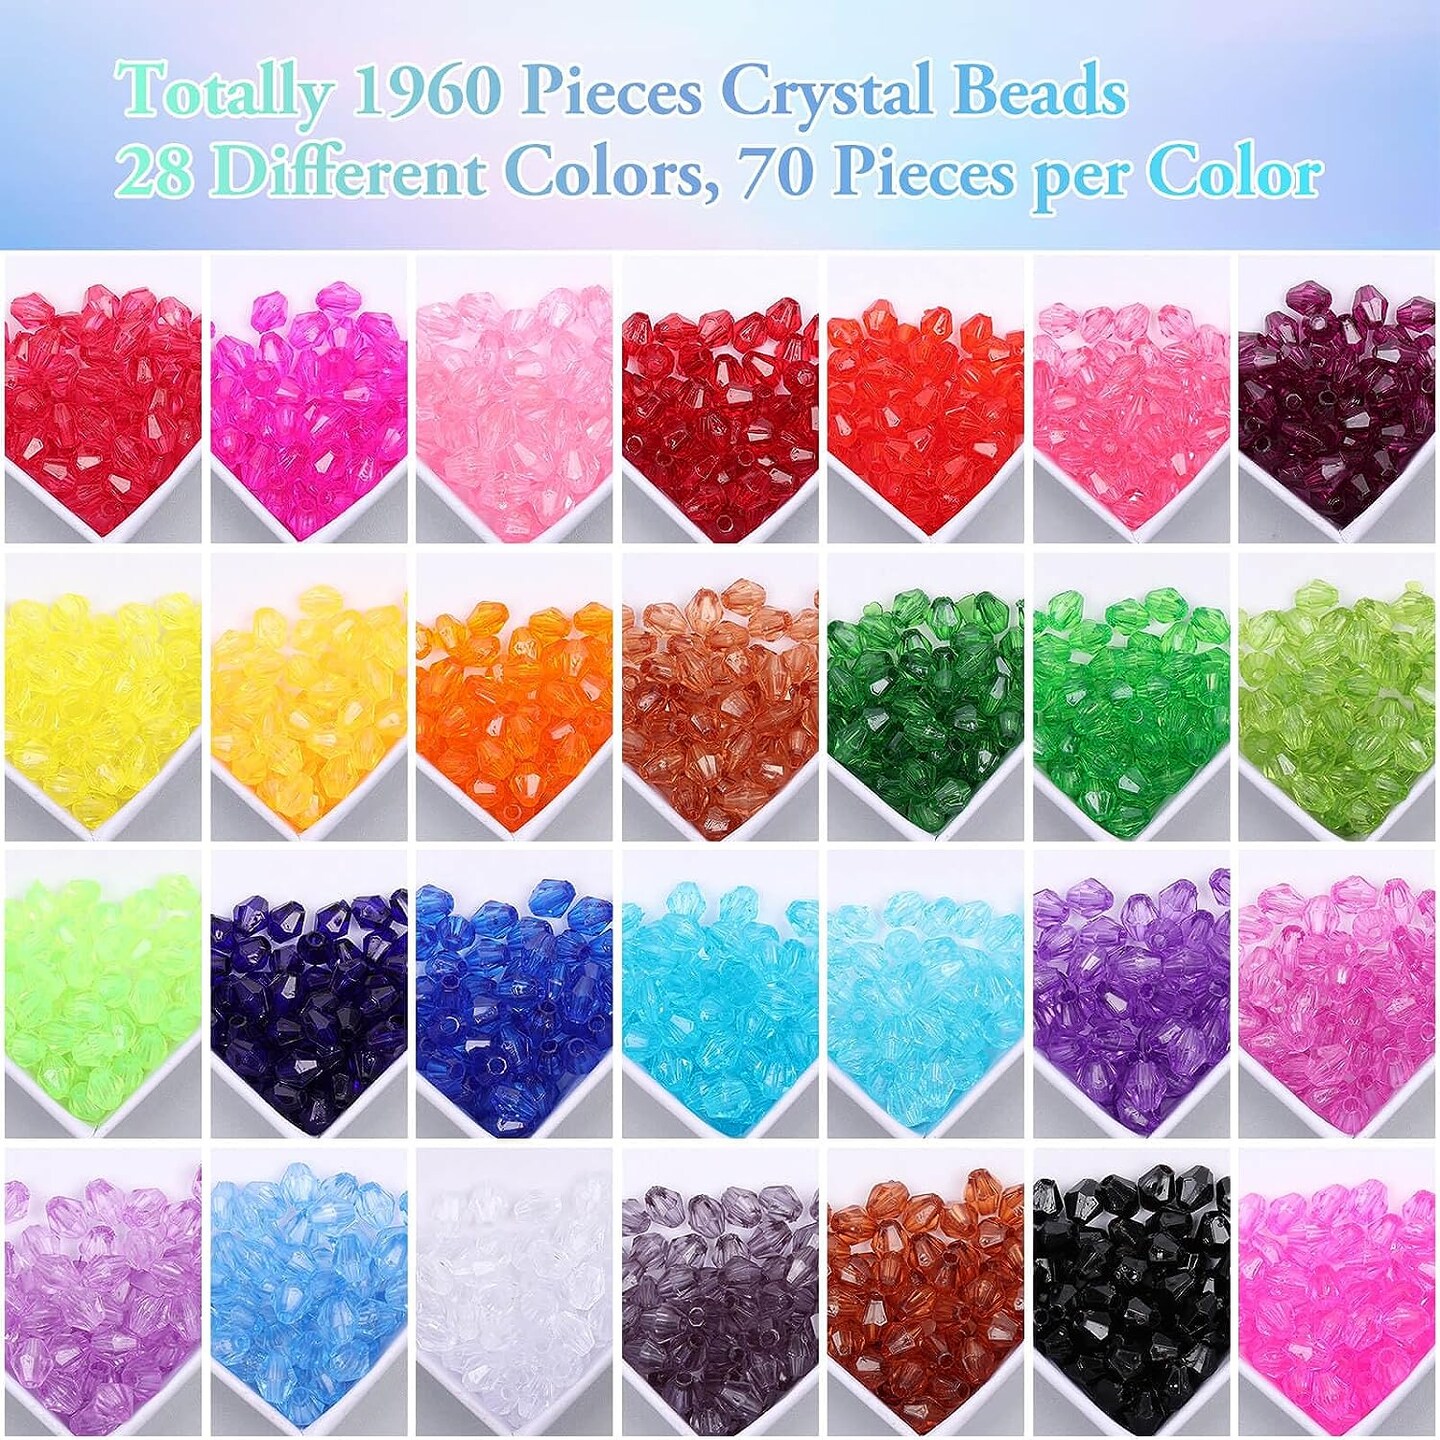 1960Pcs Crystal Beads for Jewelry Making, Small Crystal Acrylic Beads Faceted Jewelry Beads Bicone Gem Beads Jewel for Jewelry Making